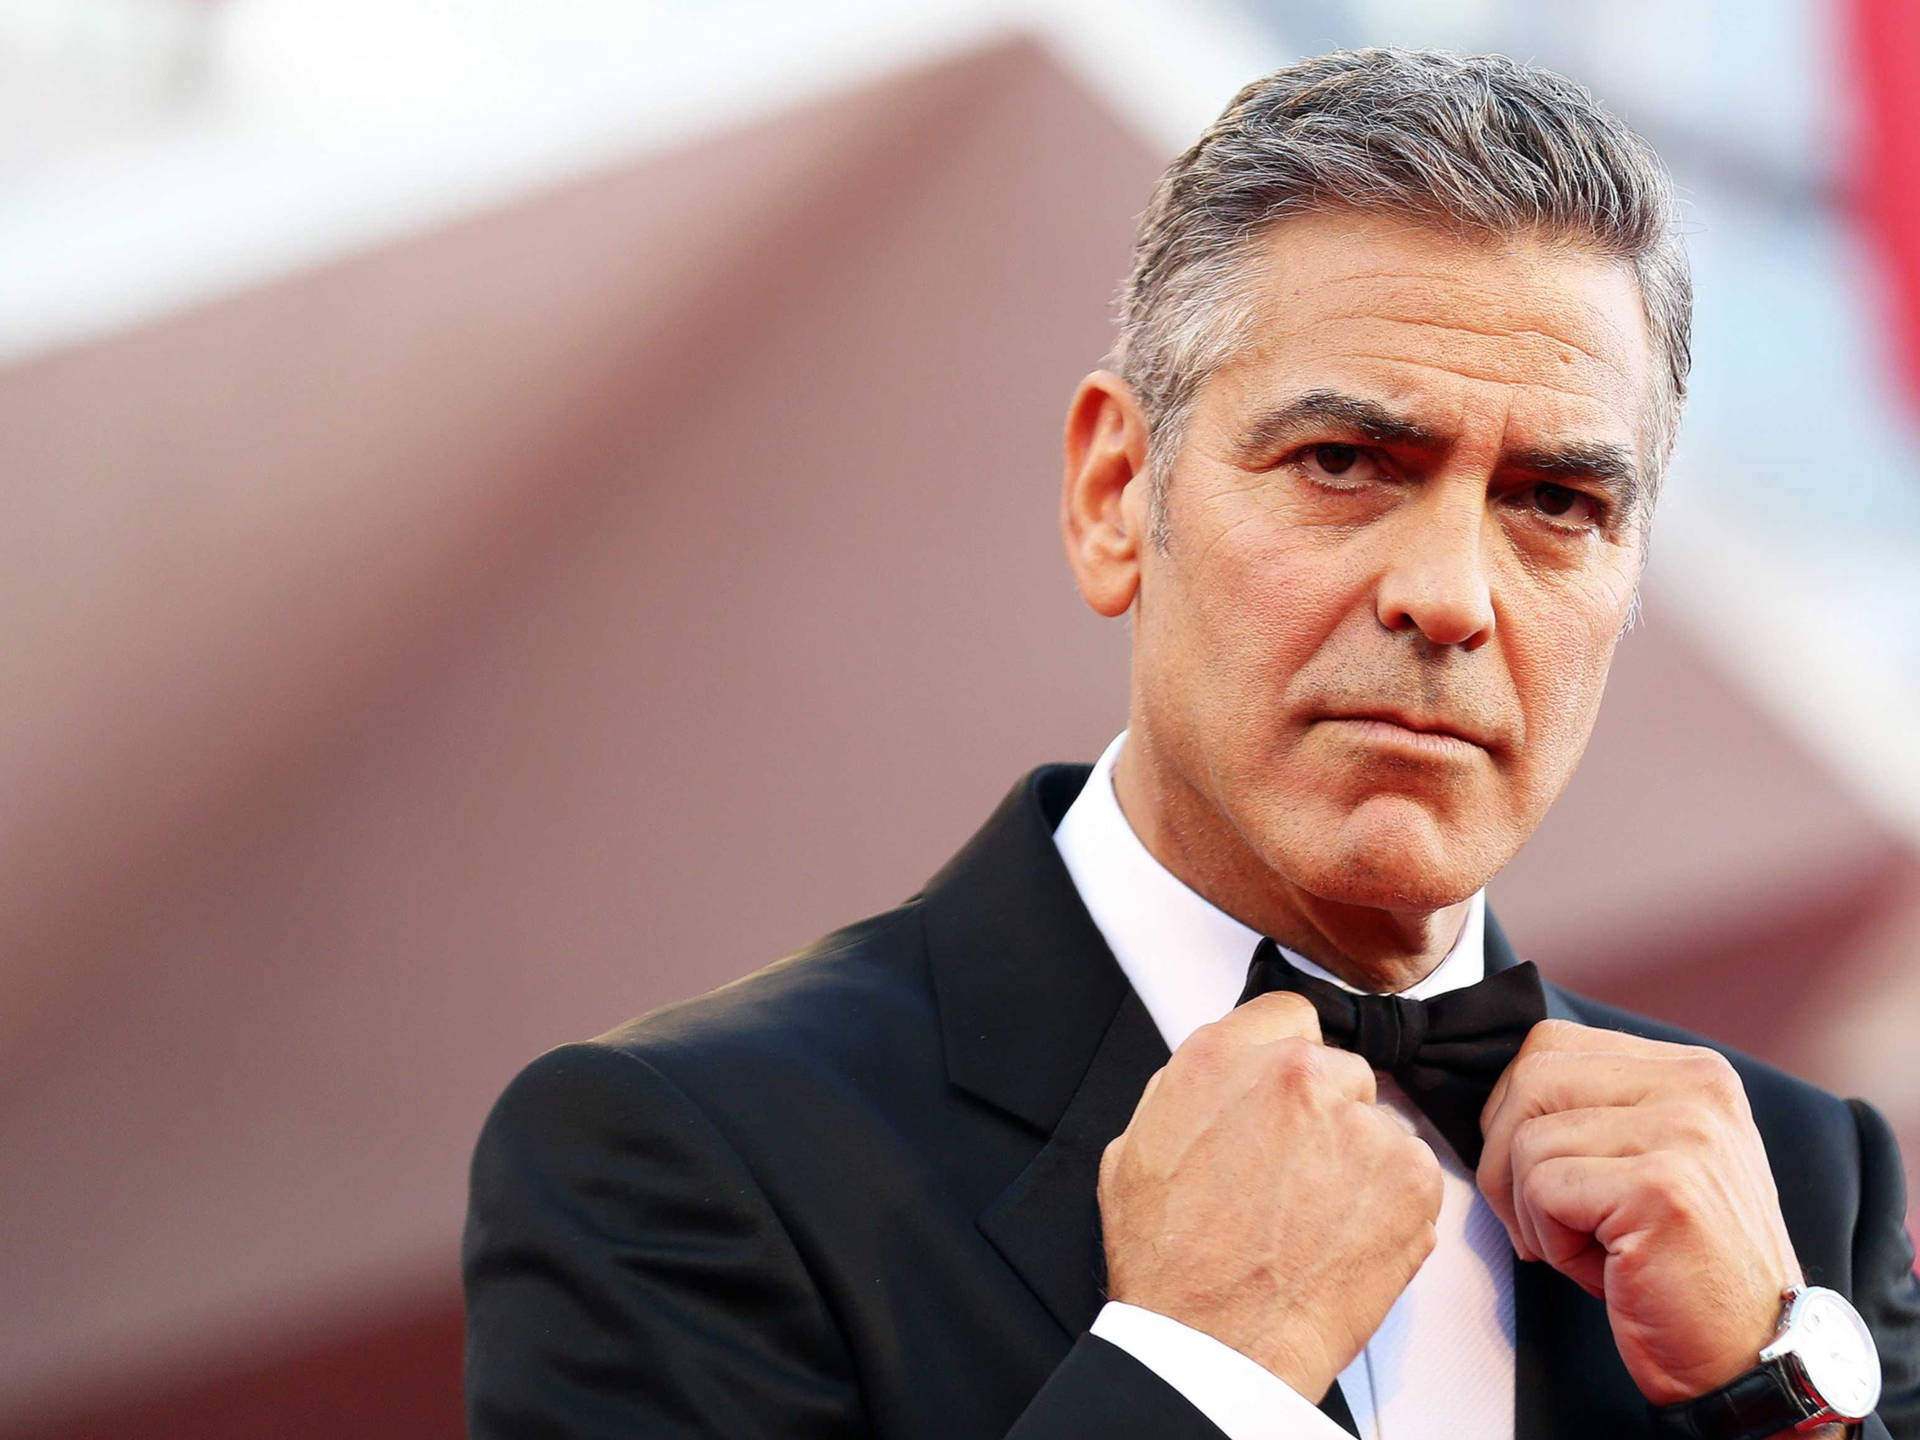 George Clooney Fixing His Bow Tie Wallpaper